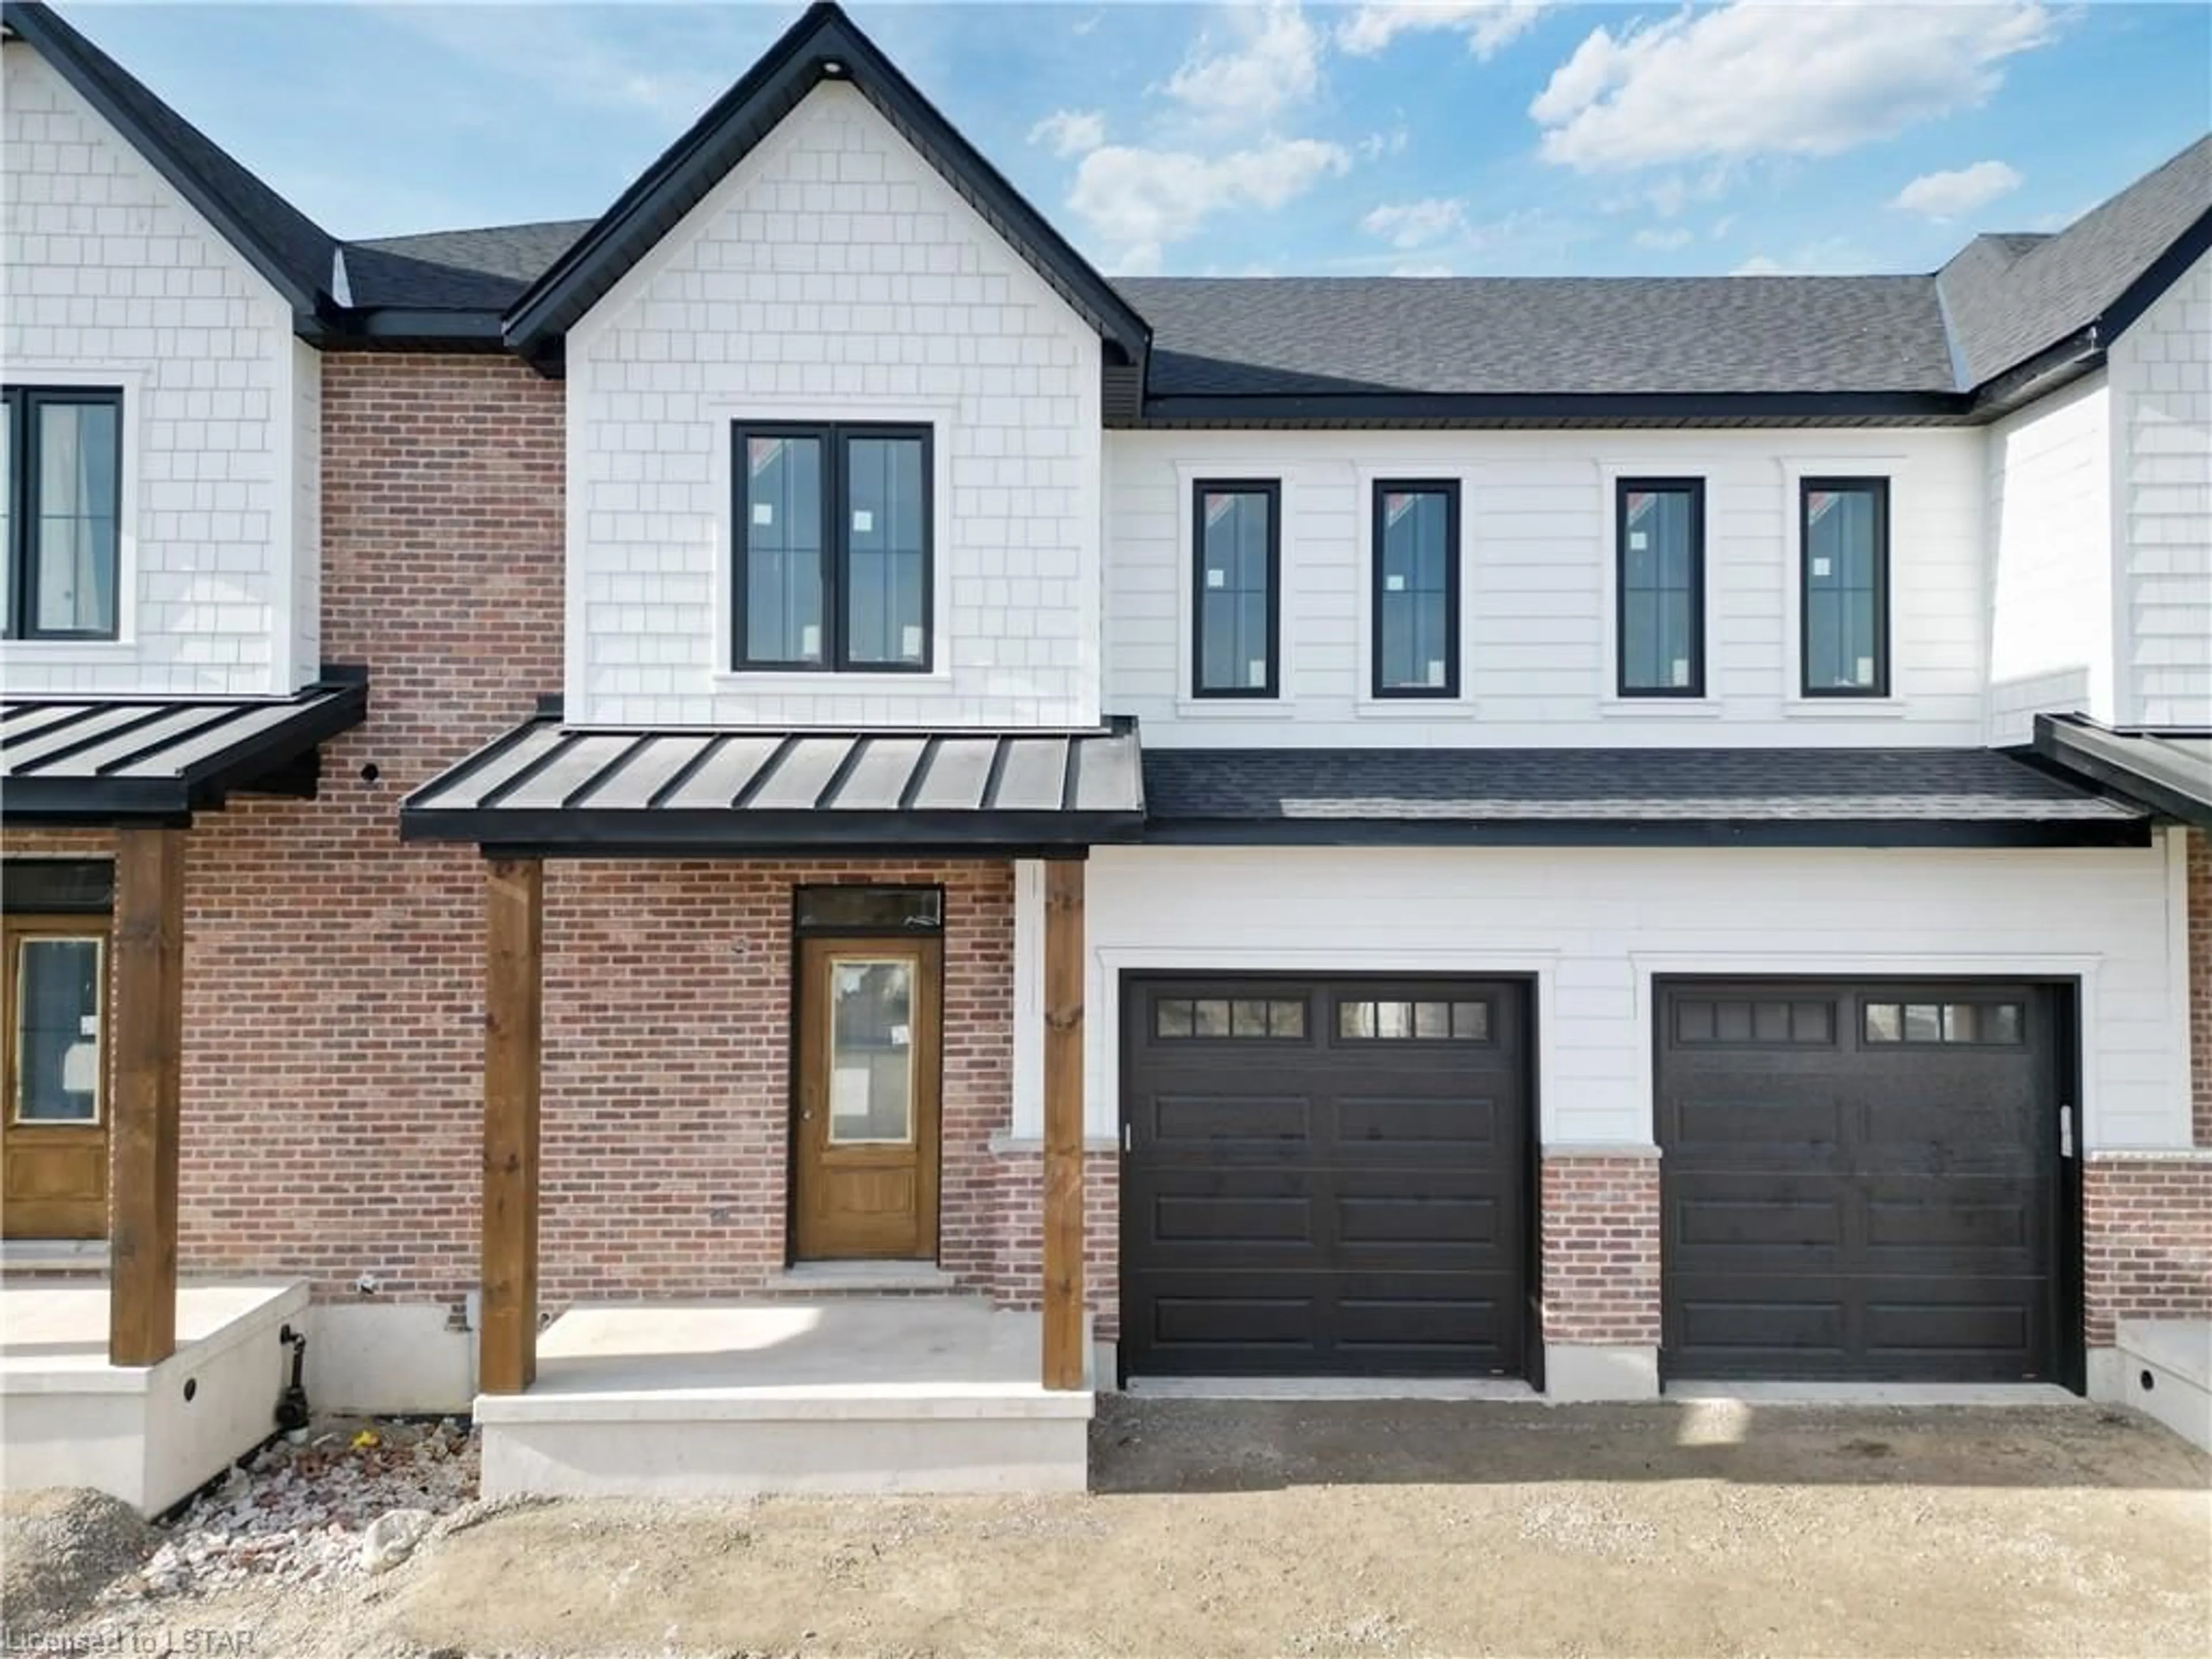 Home with brick exterior material for 147 Scotts Dr #35, Lucan Ontario N0M 2J0